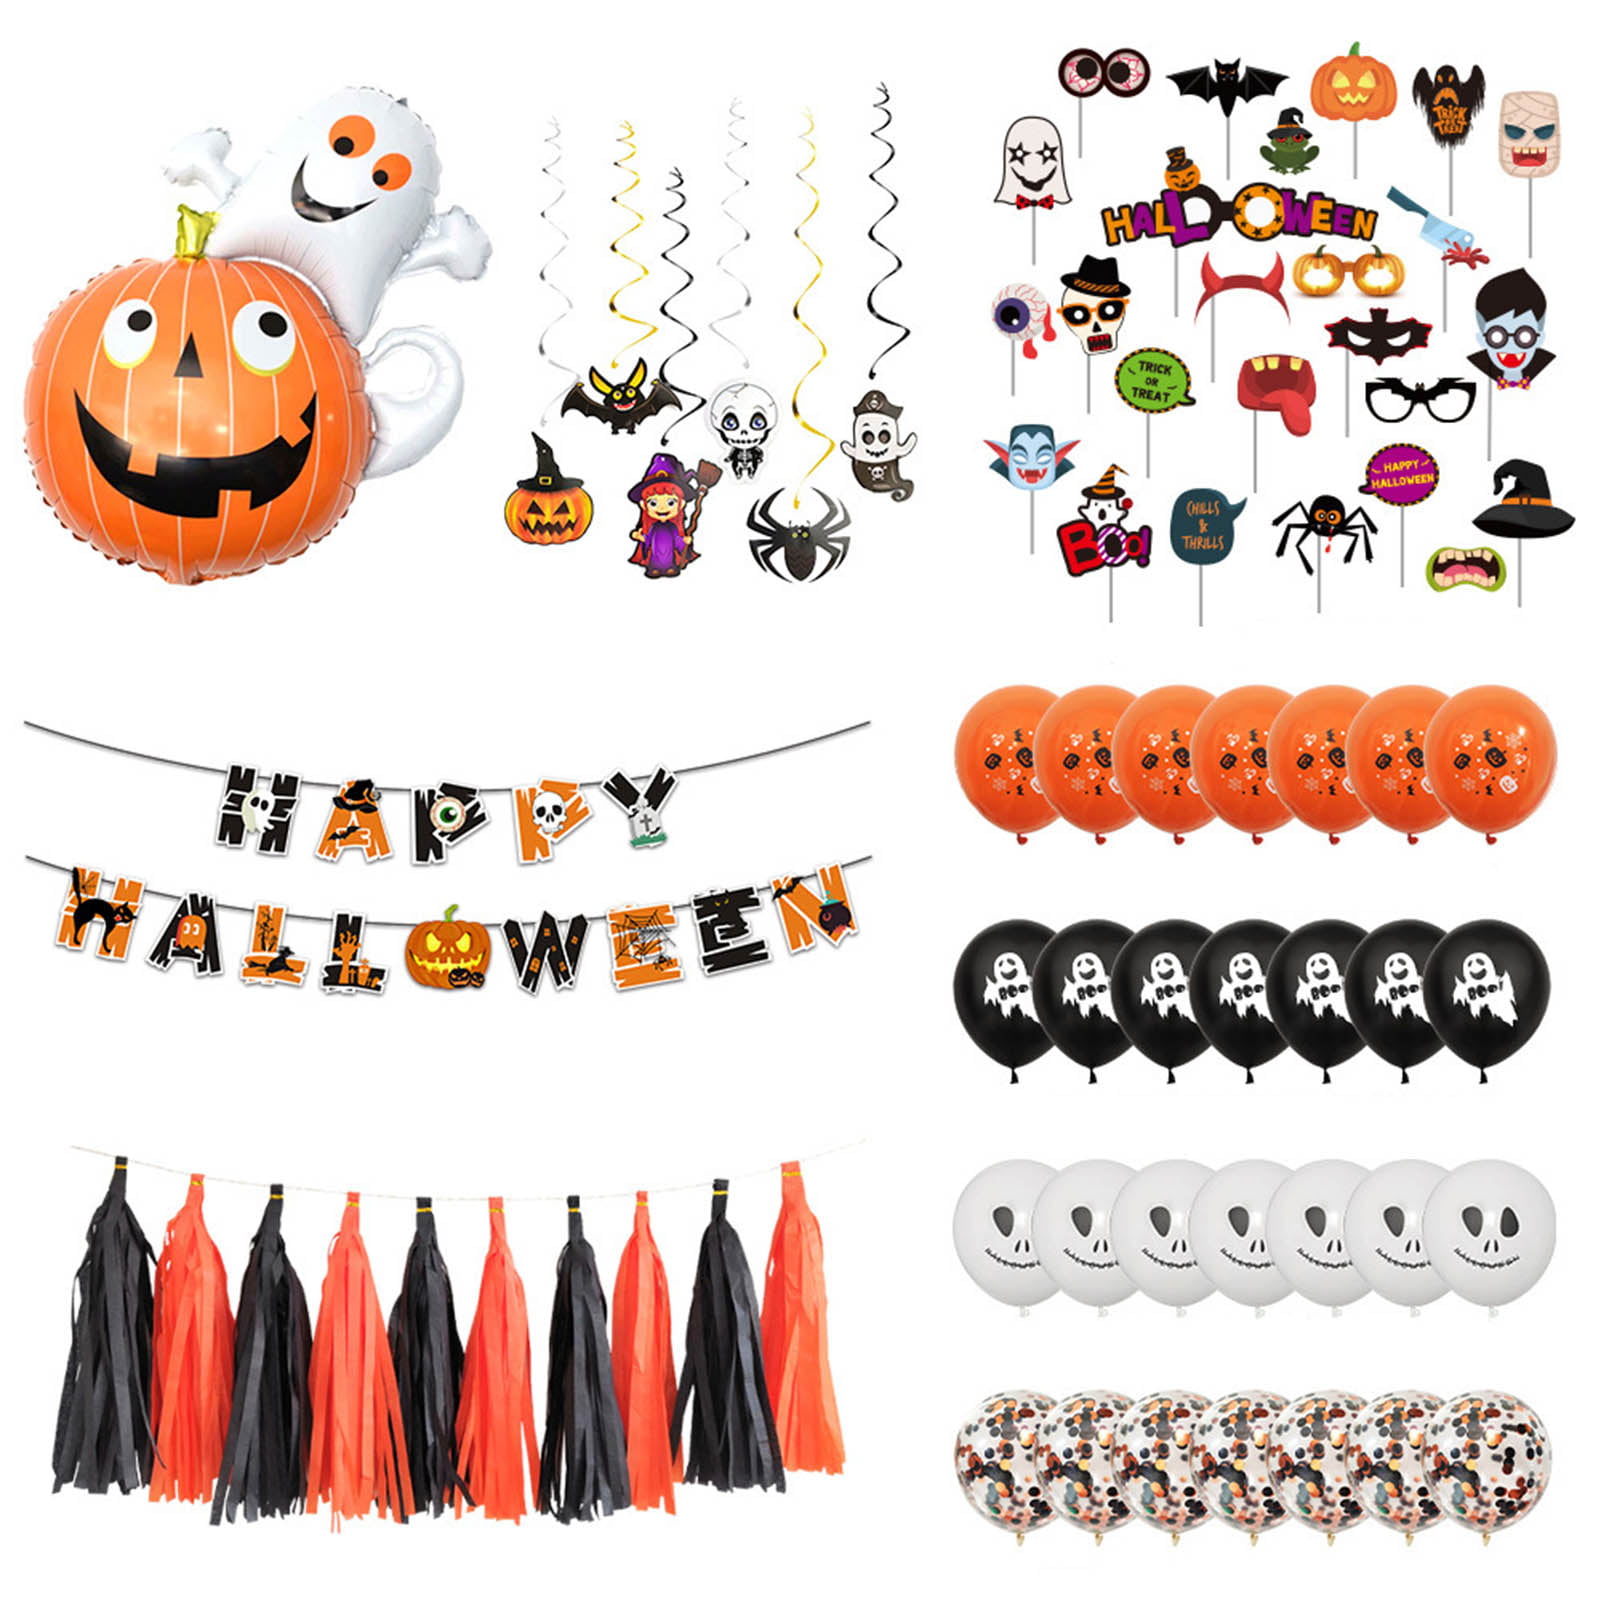 Halloween-Balloon-Garland-Arch-Kit Spider New 79pcs Style Latex Decoration Supplies for Party Background Garden Classroom Outside Grimace Set Includes Pumpkin